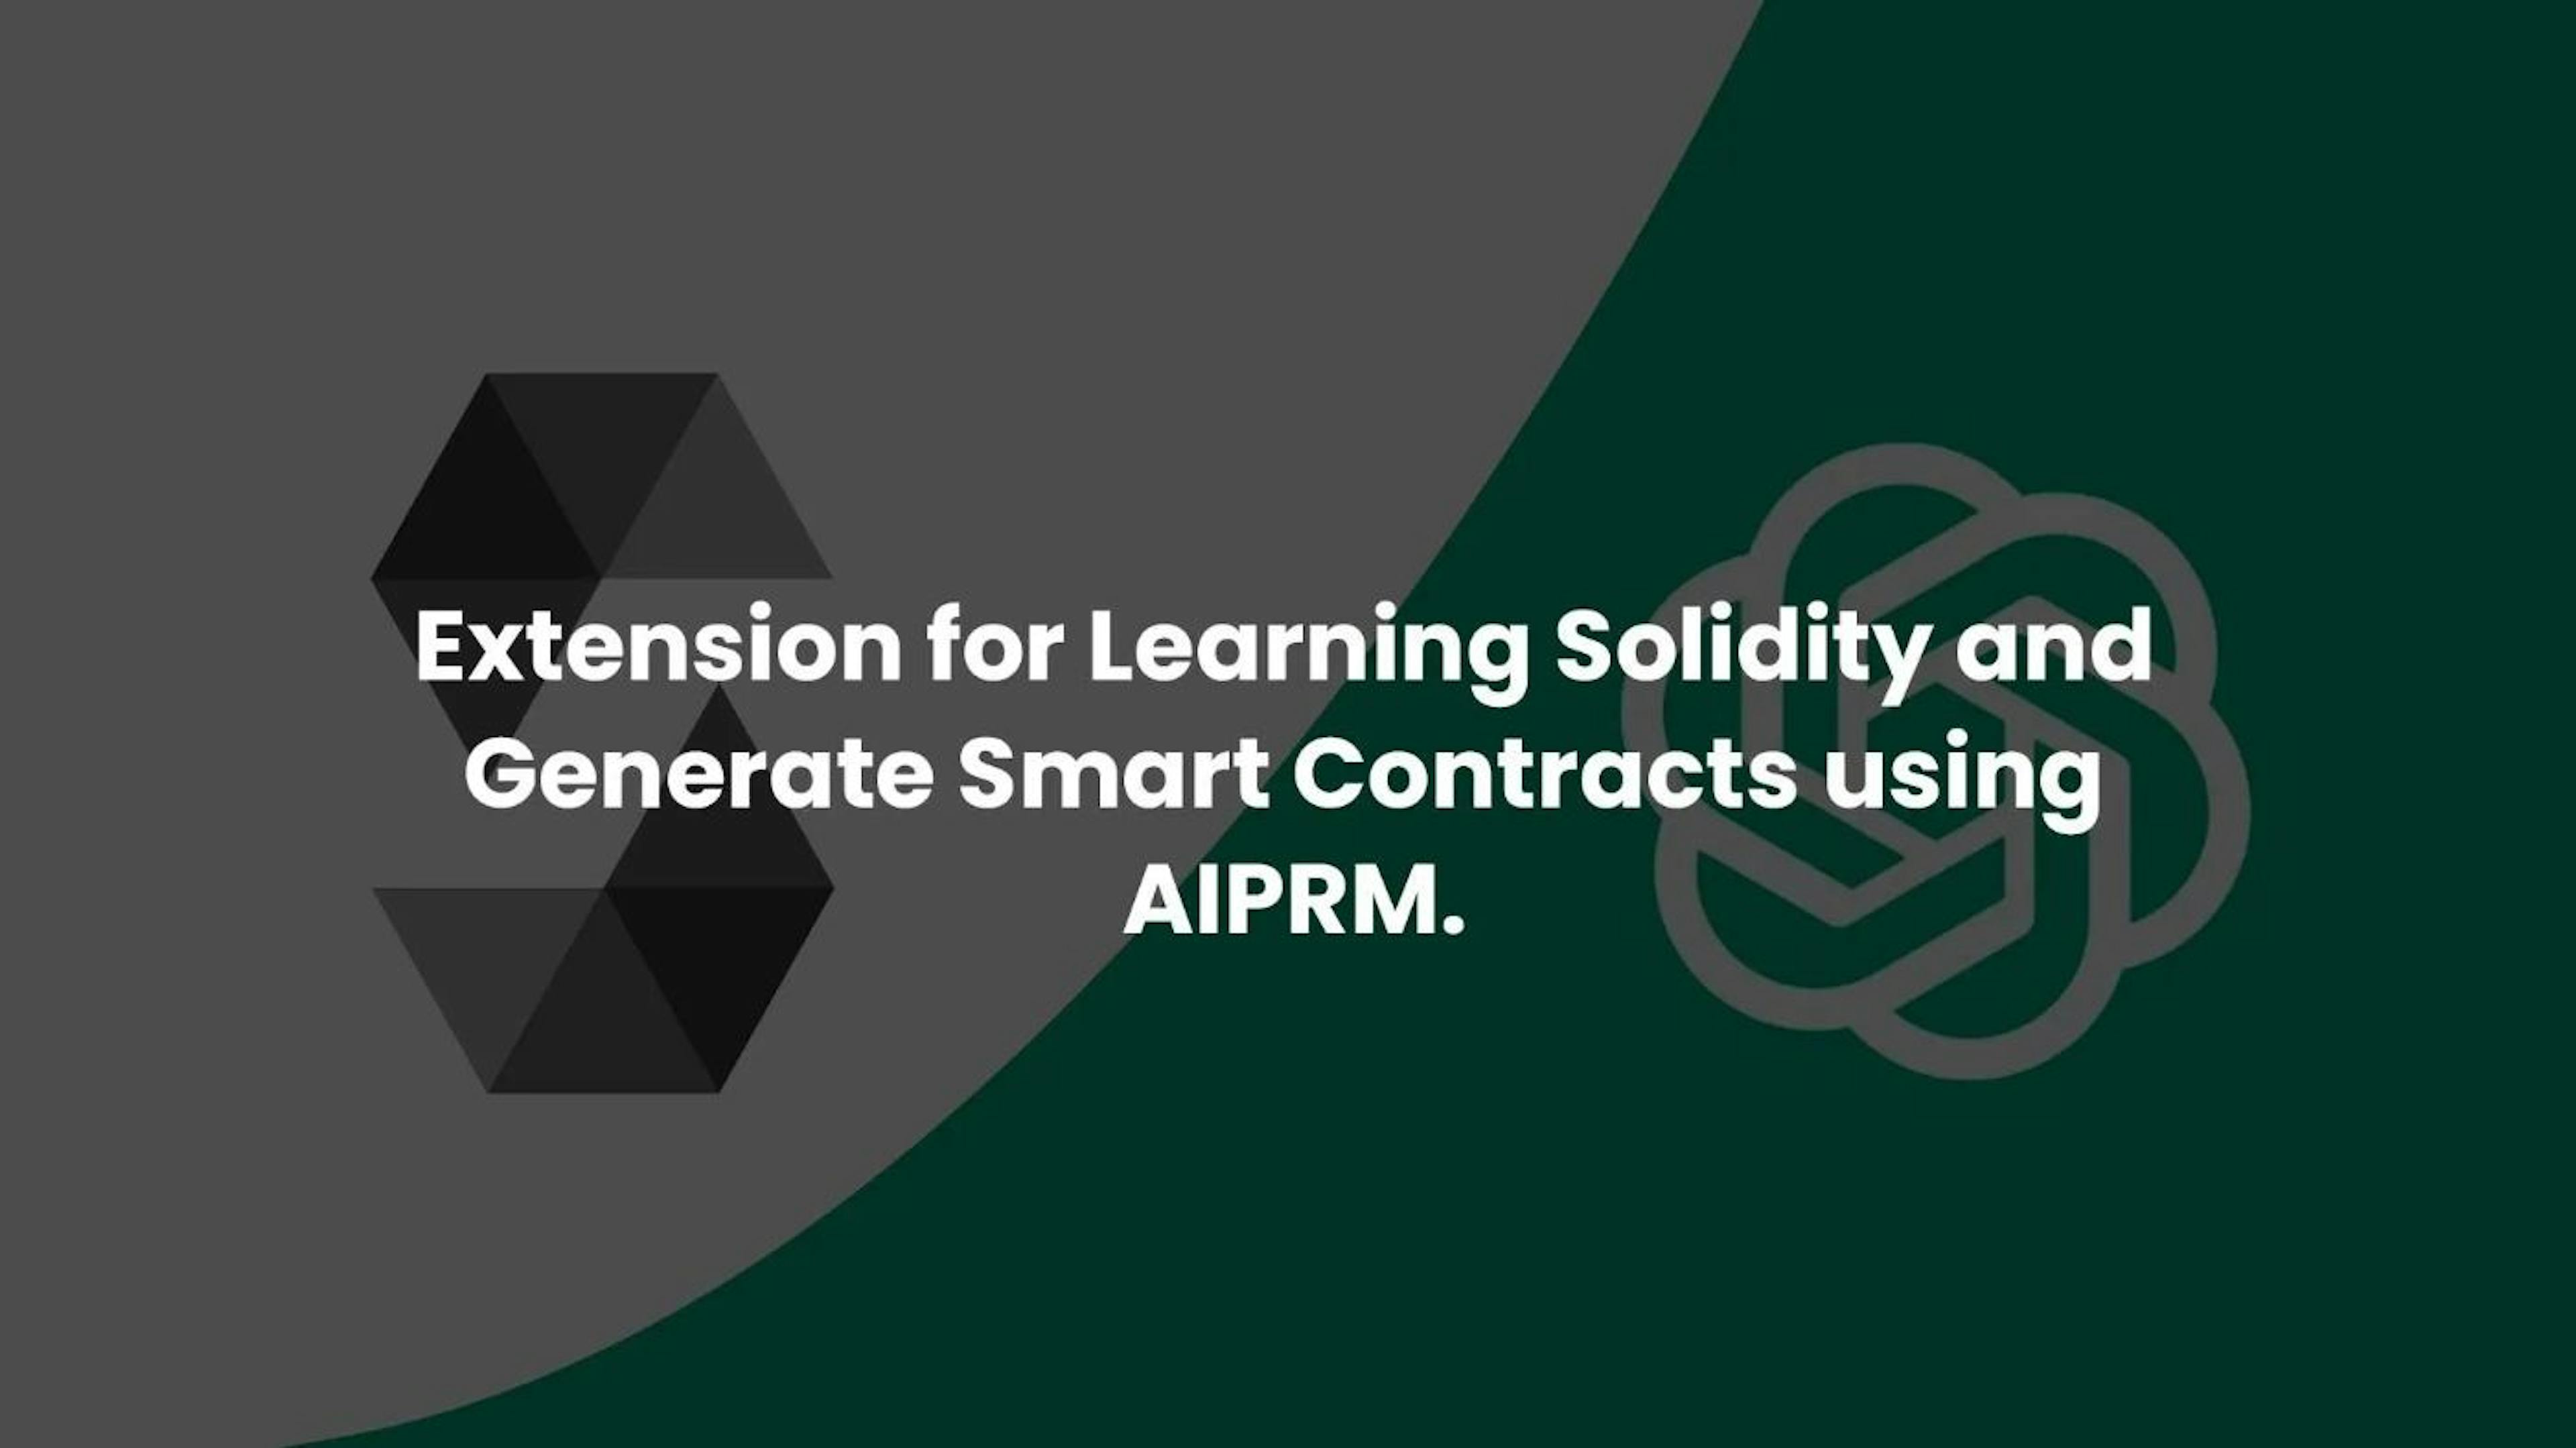 featured image - ChatGPT x Solidity x AIPRM: A Powerful Extension for Learning Solidity and Generate Smart Contracts